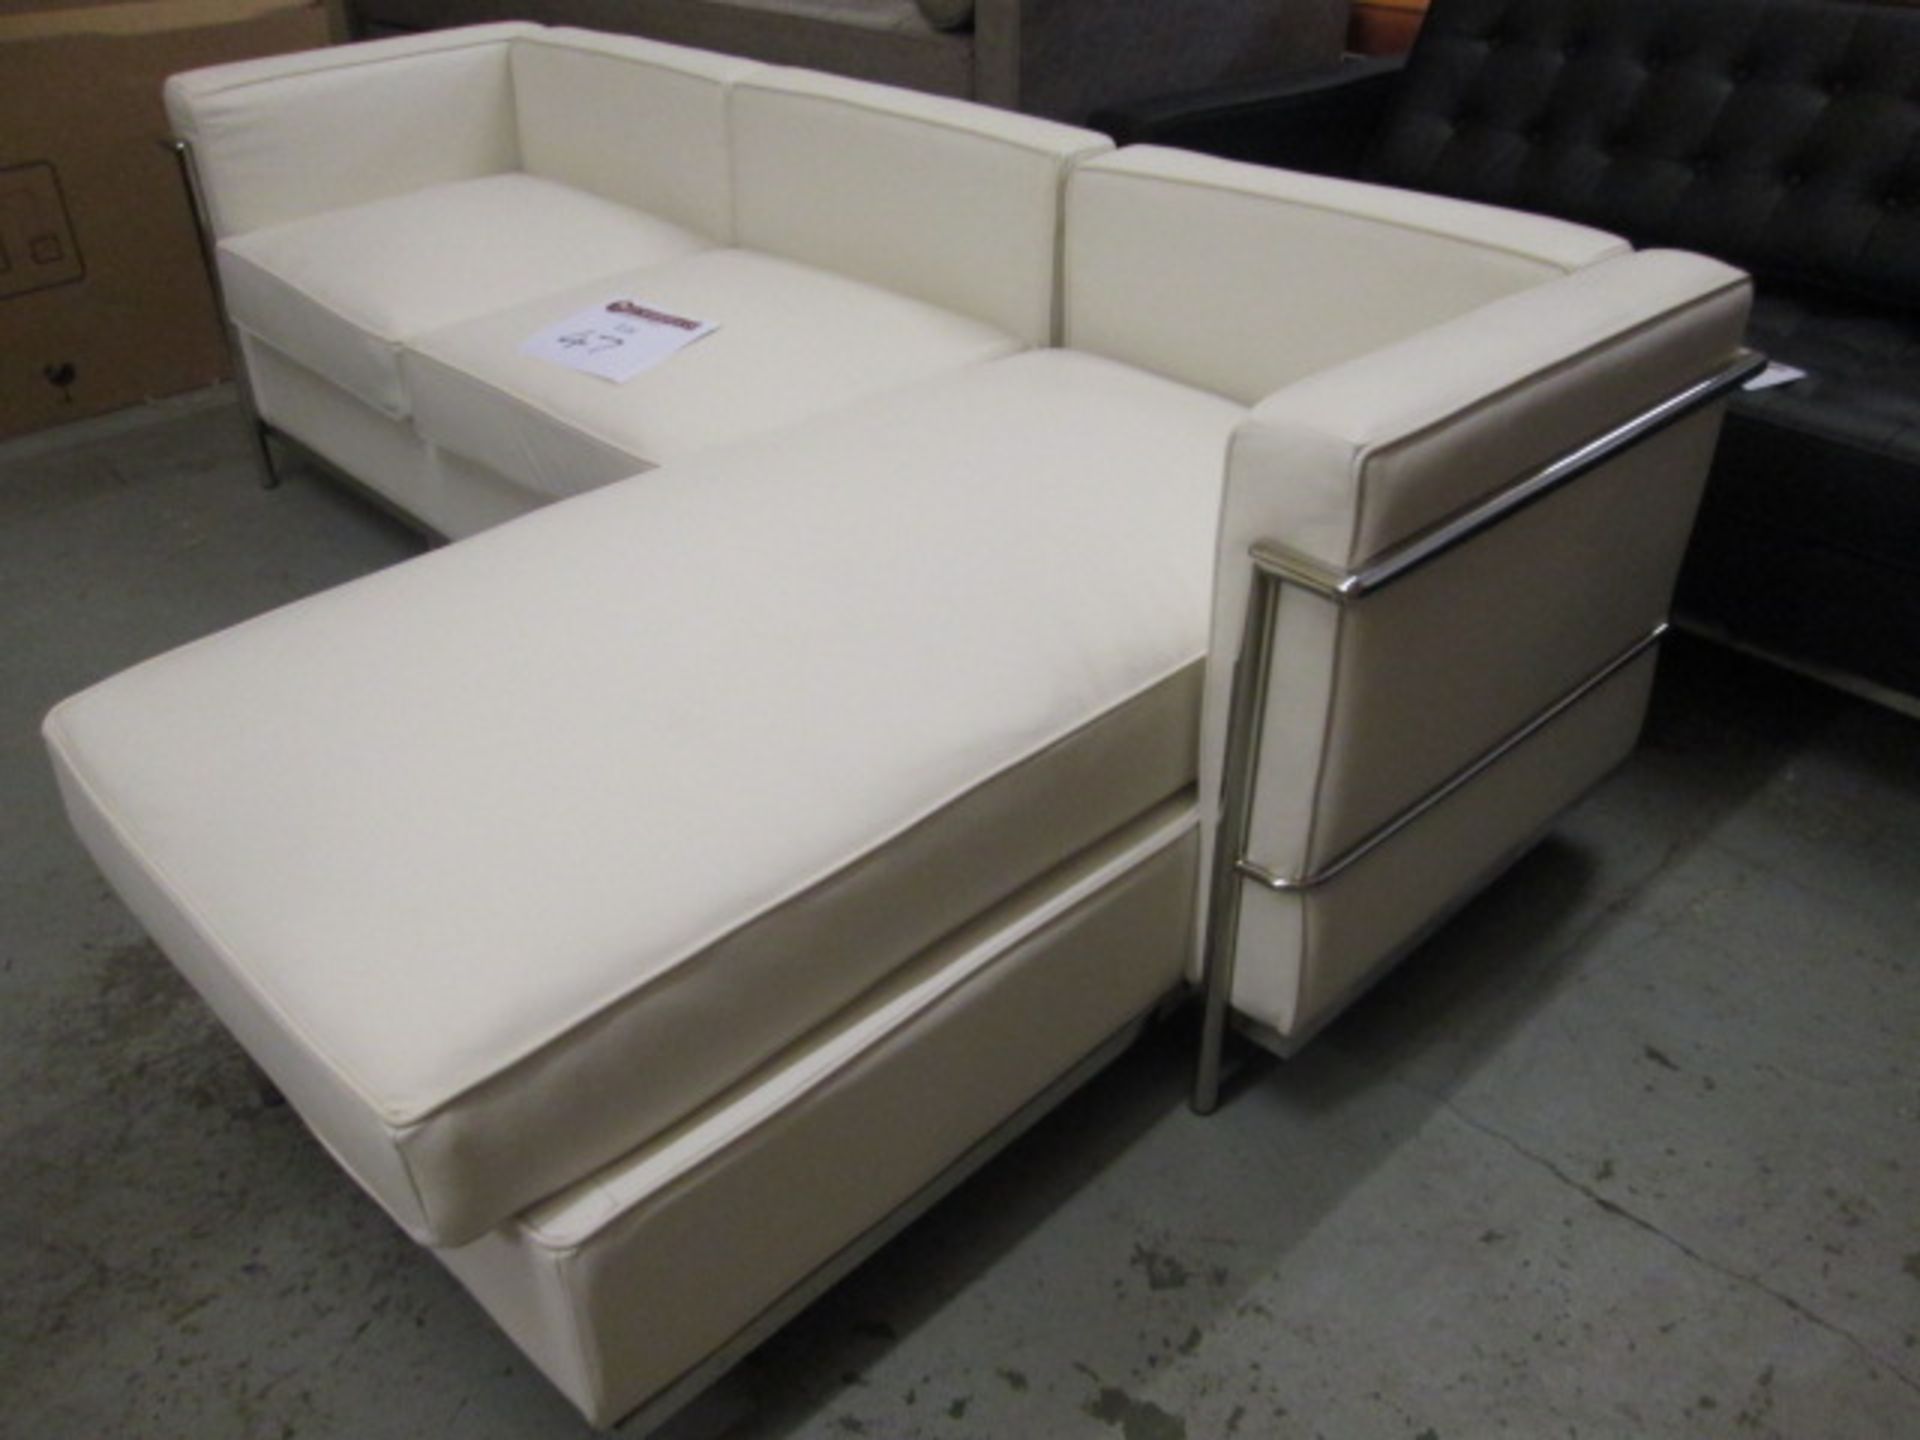 Boxed/As New - Chrome Framed Cream Leather Sofa with Chaise Lounge (2 x Boxes Model TS-S930-L). Size - Image 2 of 4